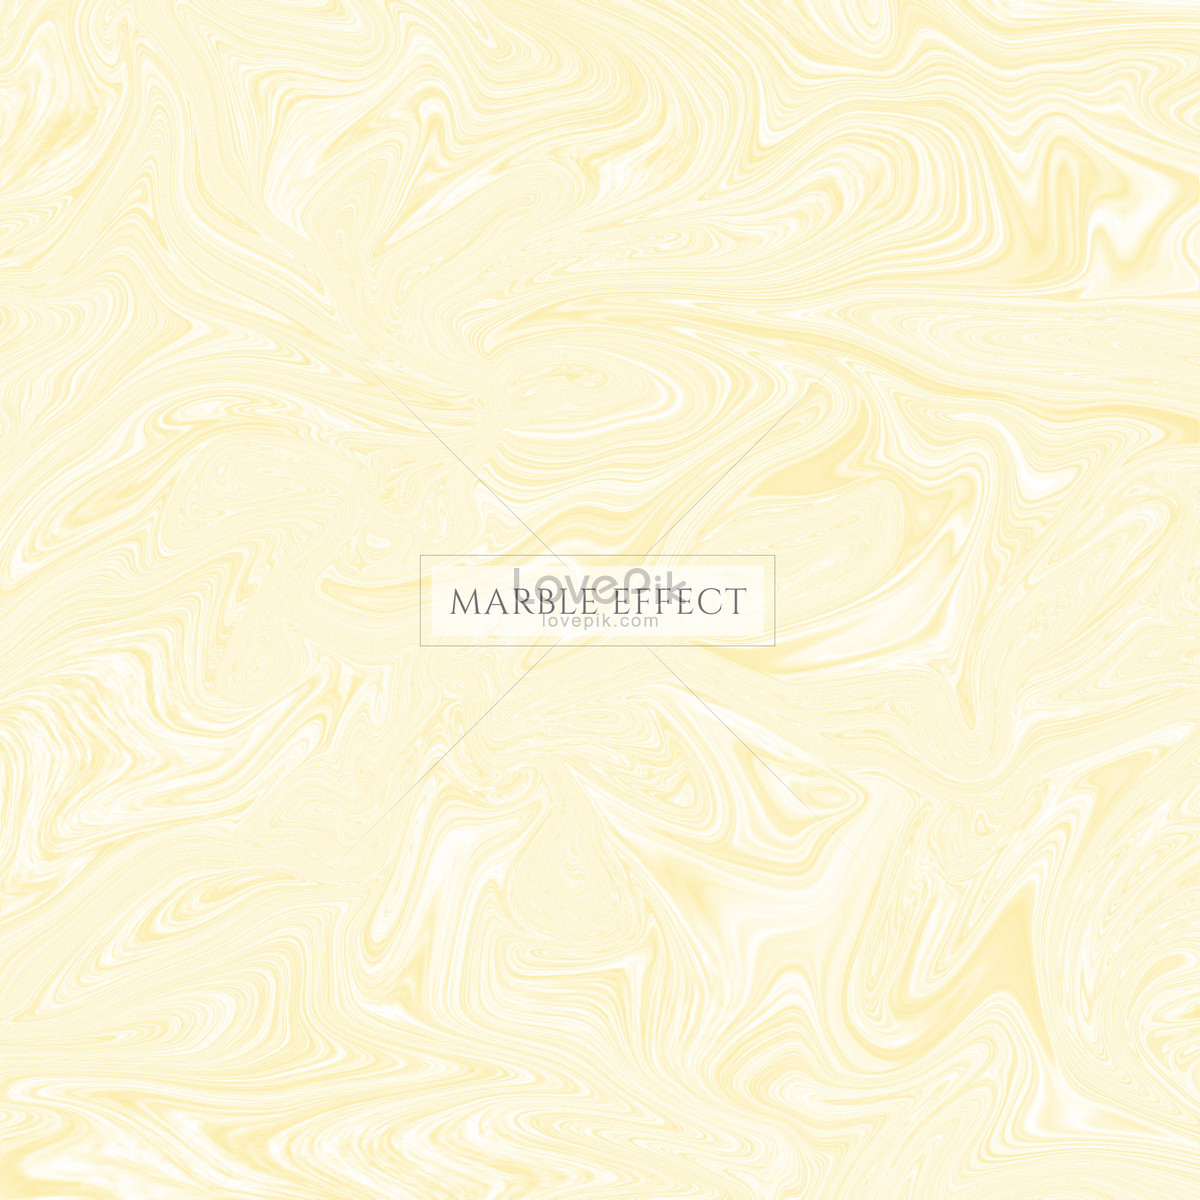 Yellow Creative Marble Texture Background Download Free | Banner Background  Image on Lovepik | 450047044